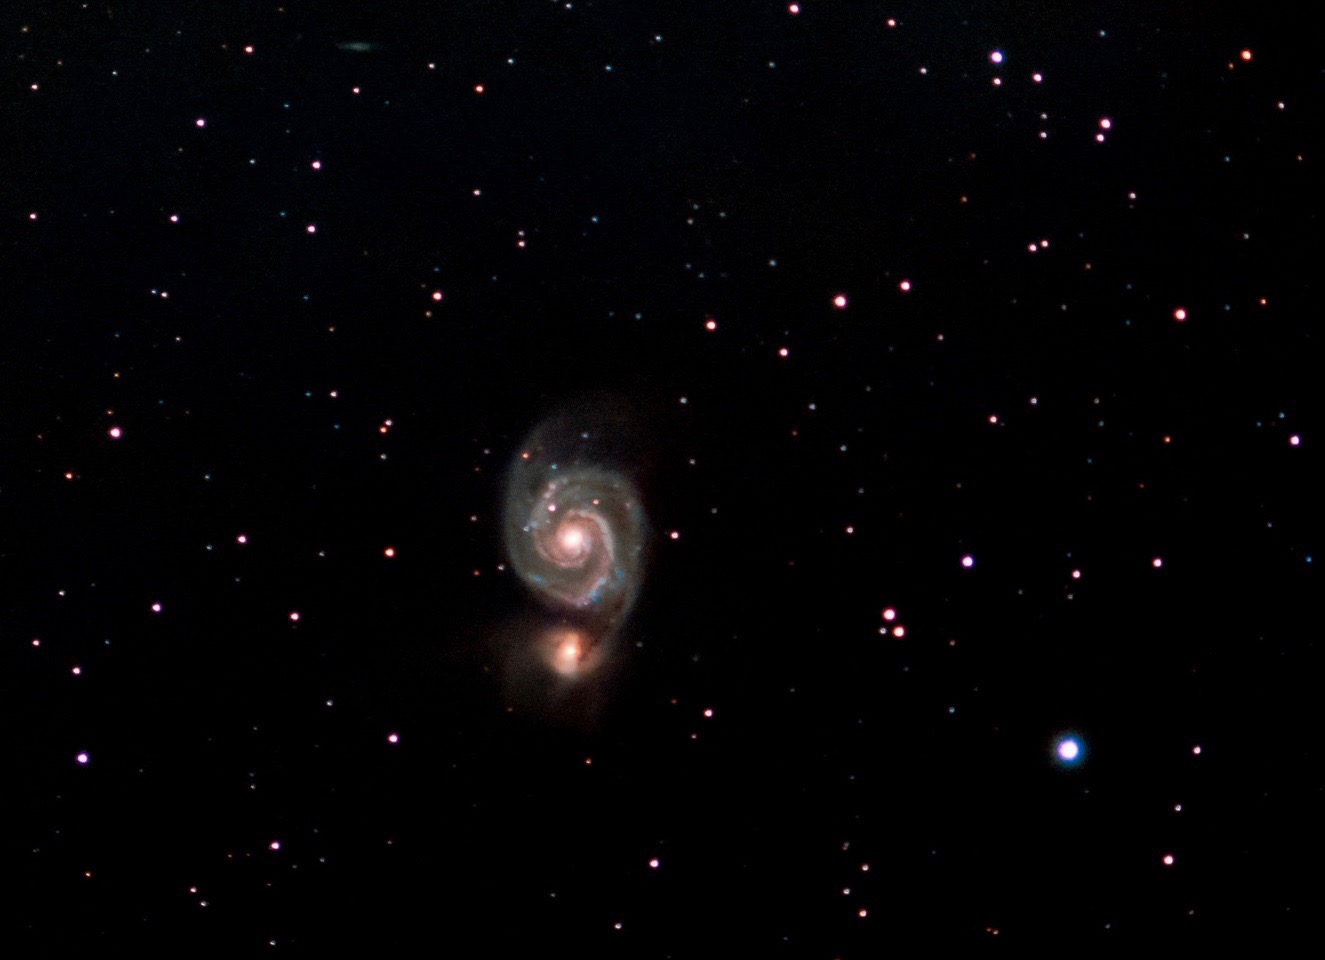 “Whirlpool Galaxy M51”. 25.8 million light-years away.The graceful winding arms of this majestic galaxy appears like a grand spiral.They are actually long lanes of stars and gas laced with dust.